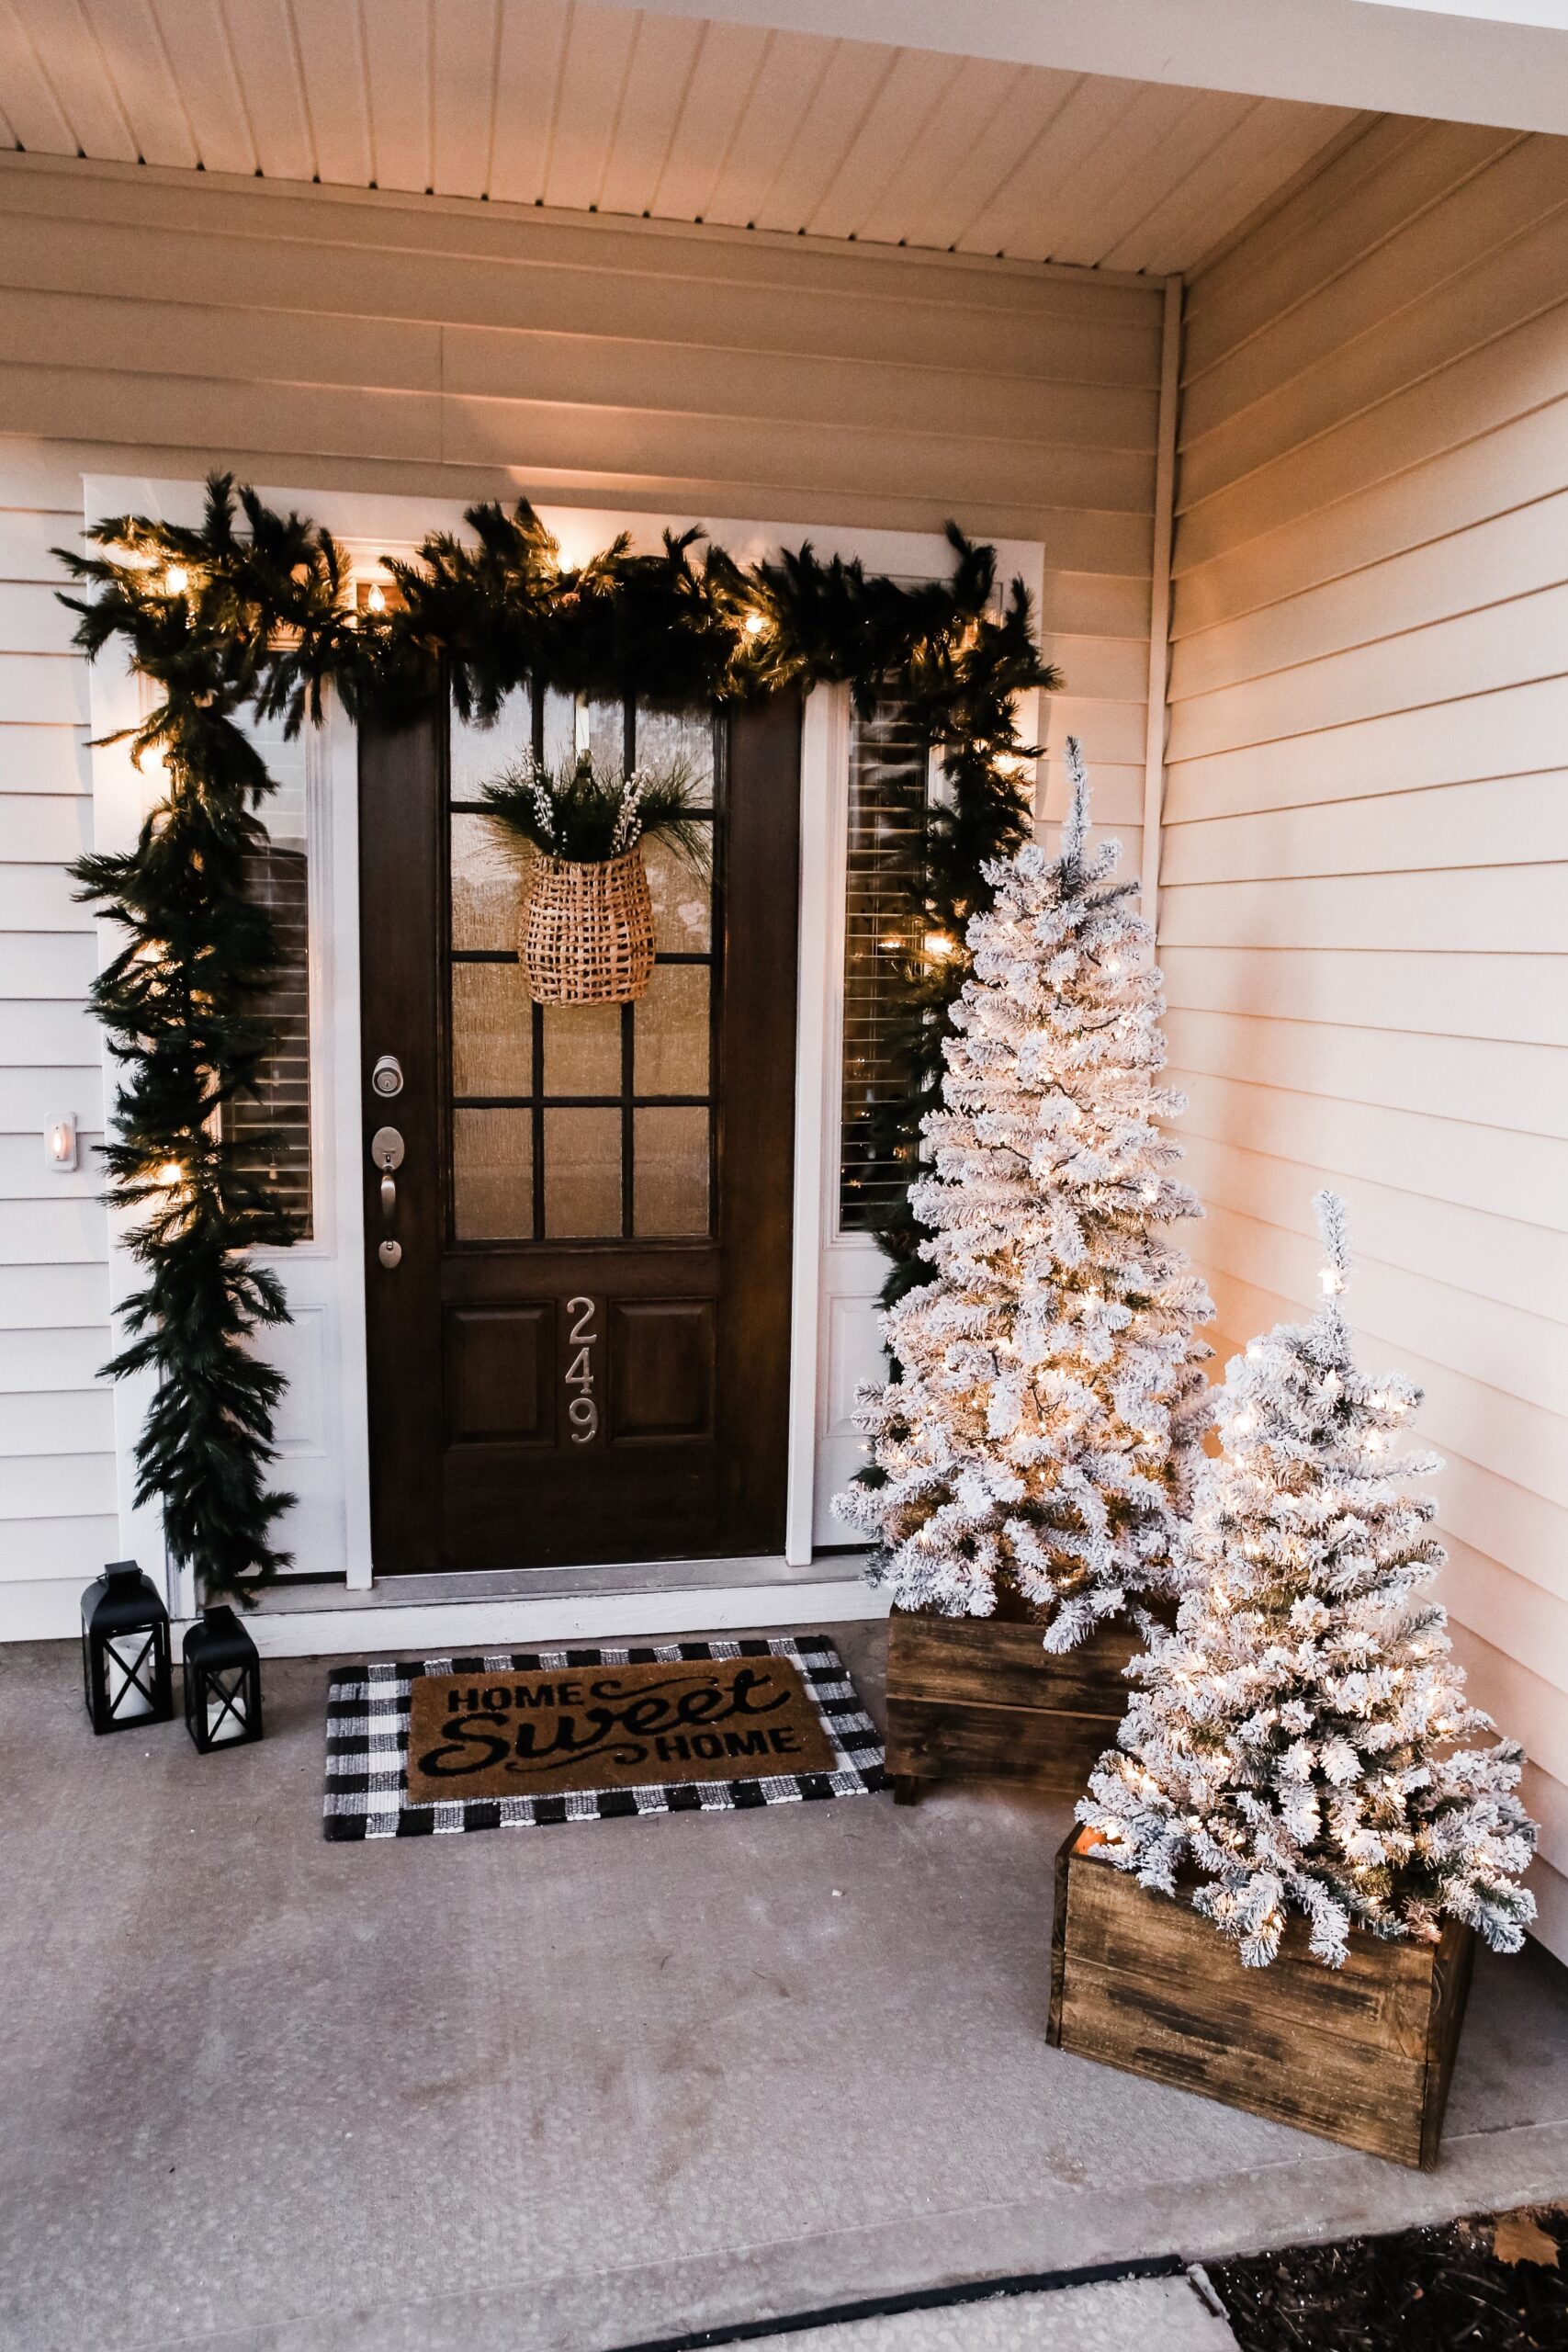 Creative Front Yard Christmas Decorations for a Festive Holiday Atmosphere